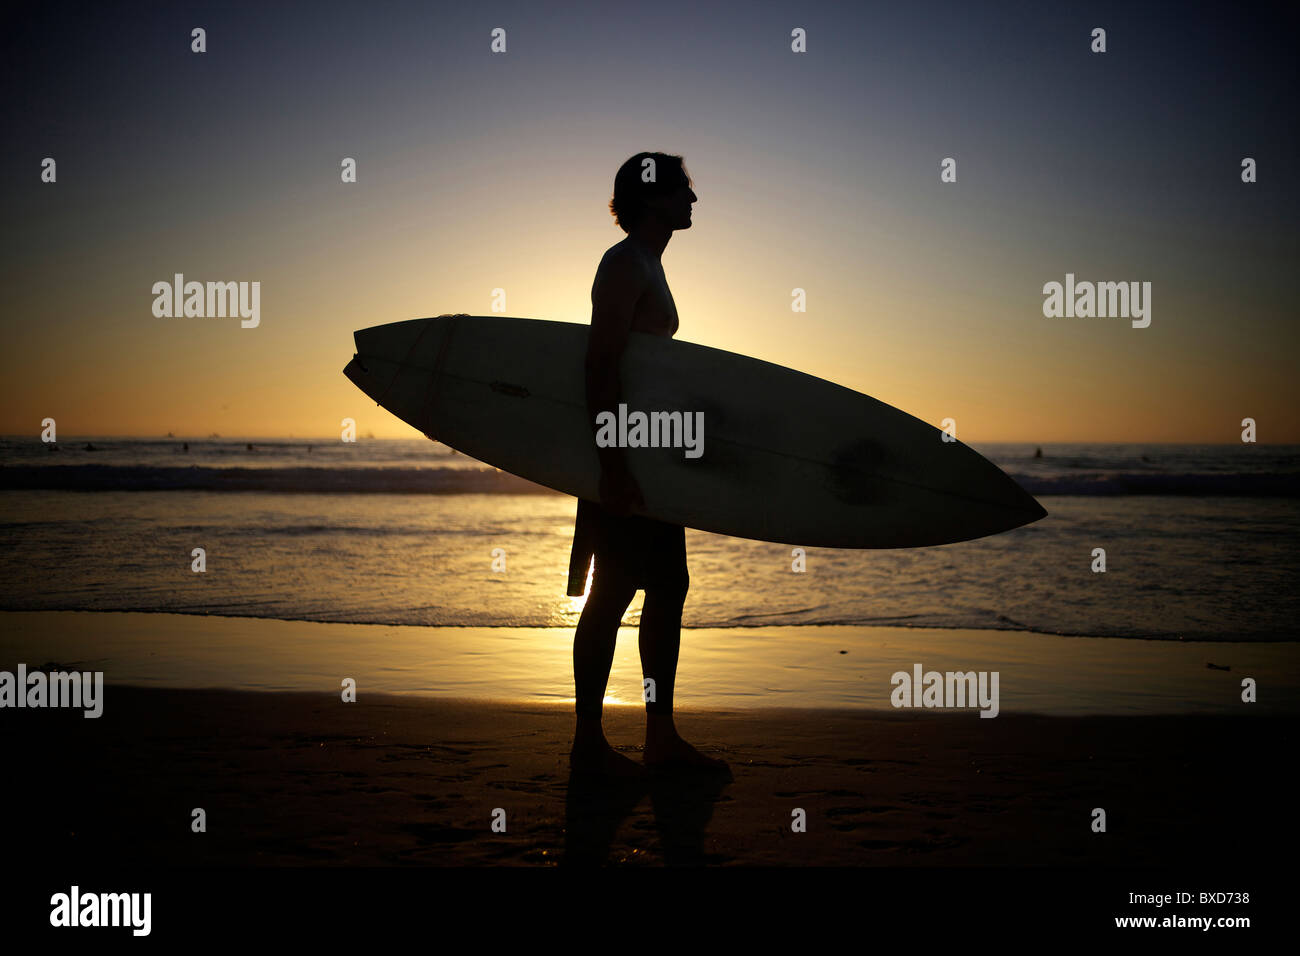 Silhouette of surfer holding a surfboard at the beach during sunset. Stock Photo